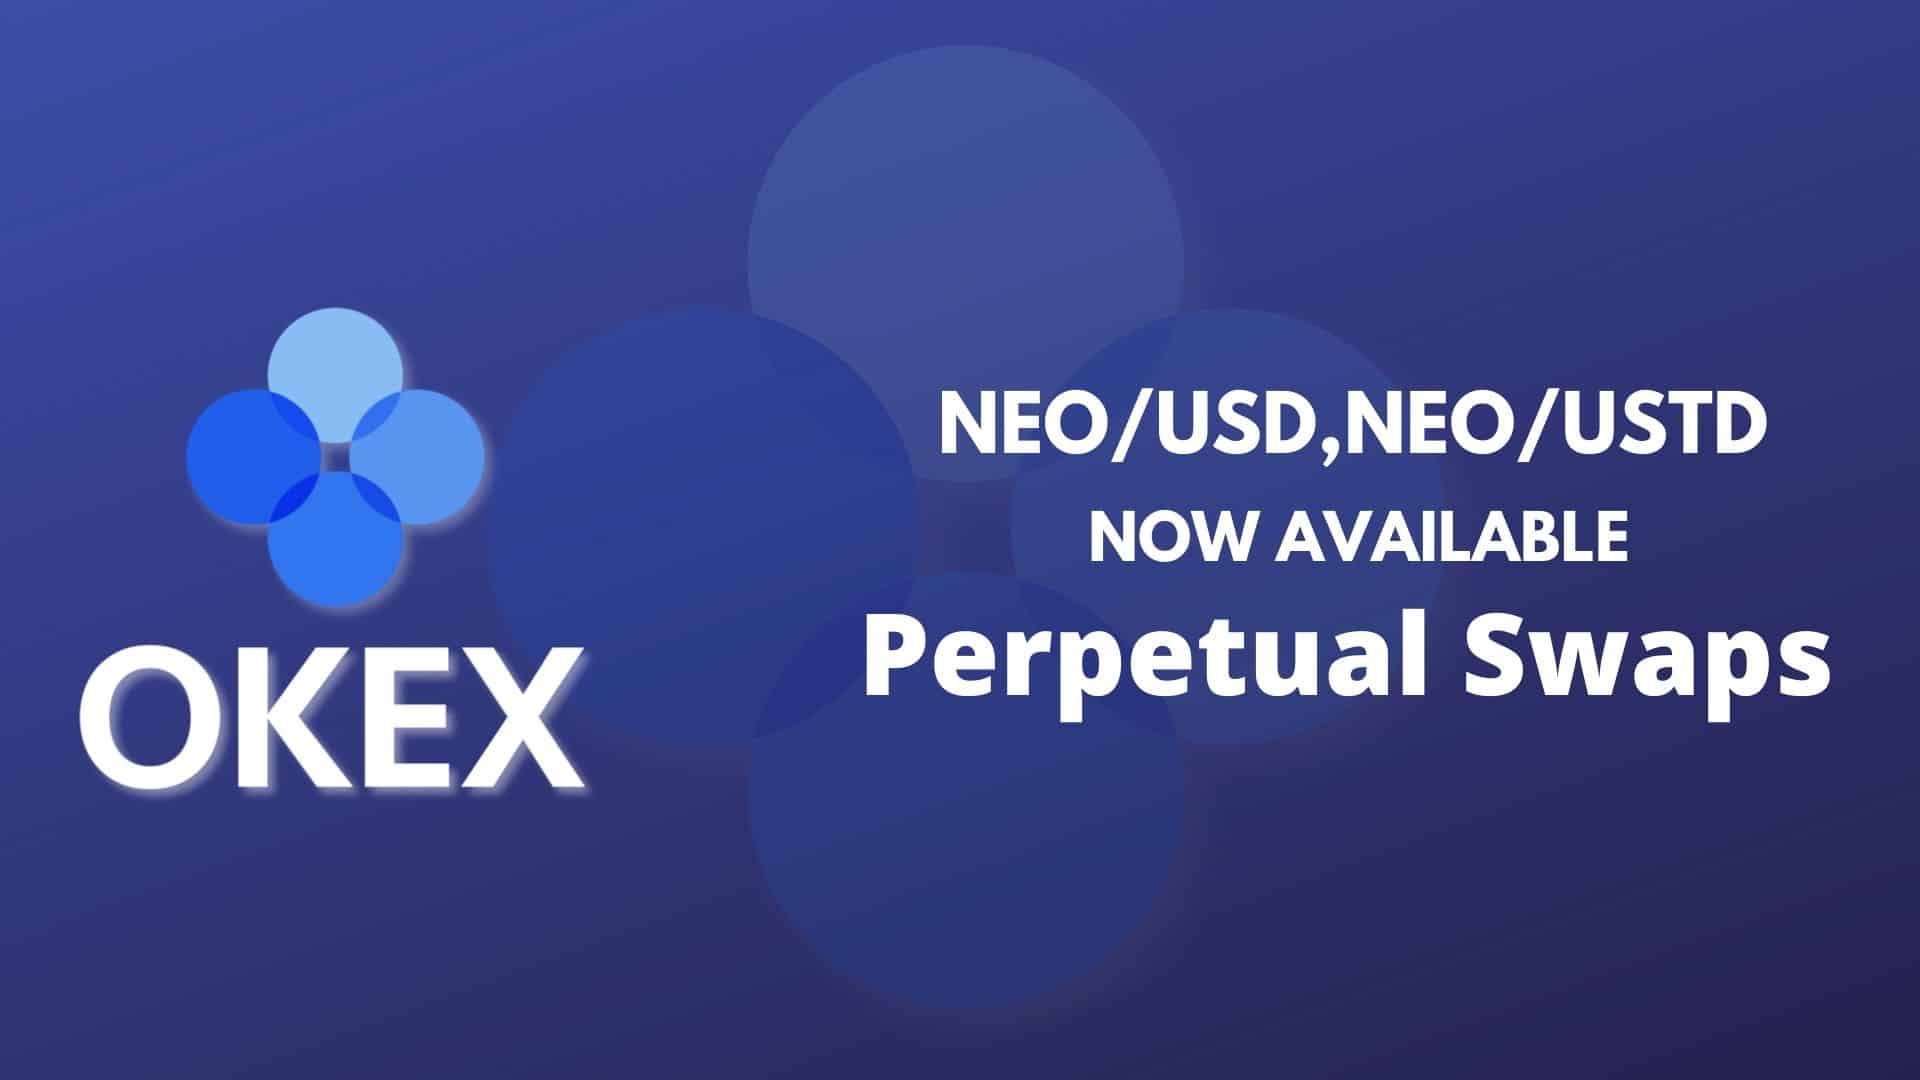 OKEx Has Launched Support for the Trading of Perpetual Swaps